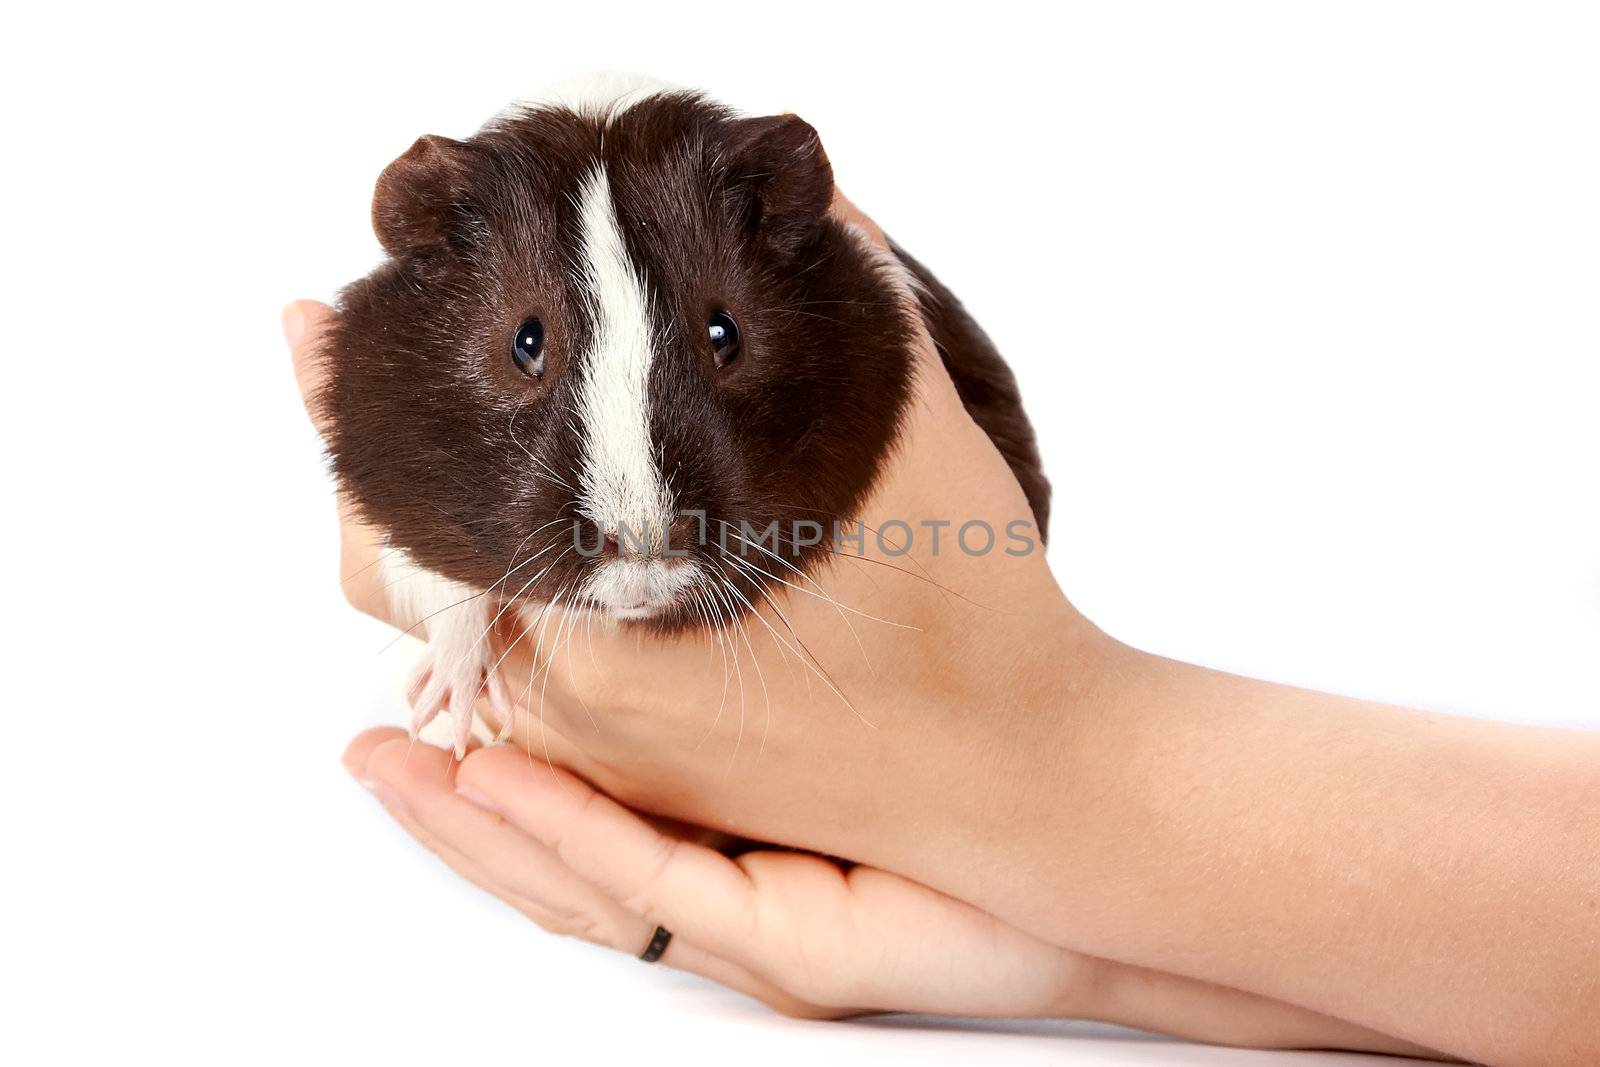 Guinea pigs on hands on a white background